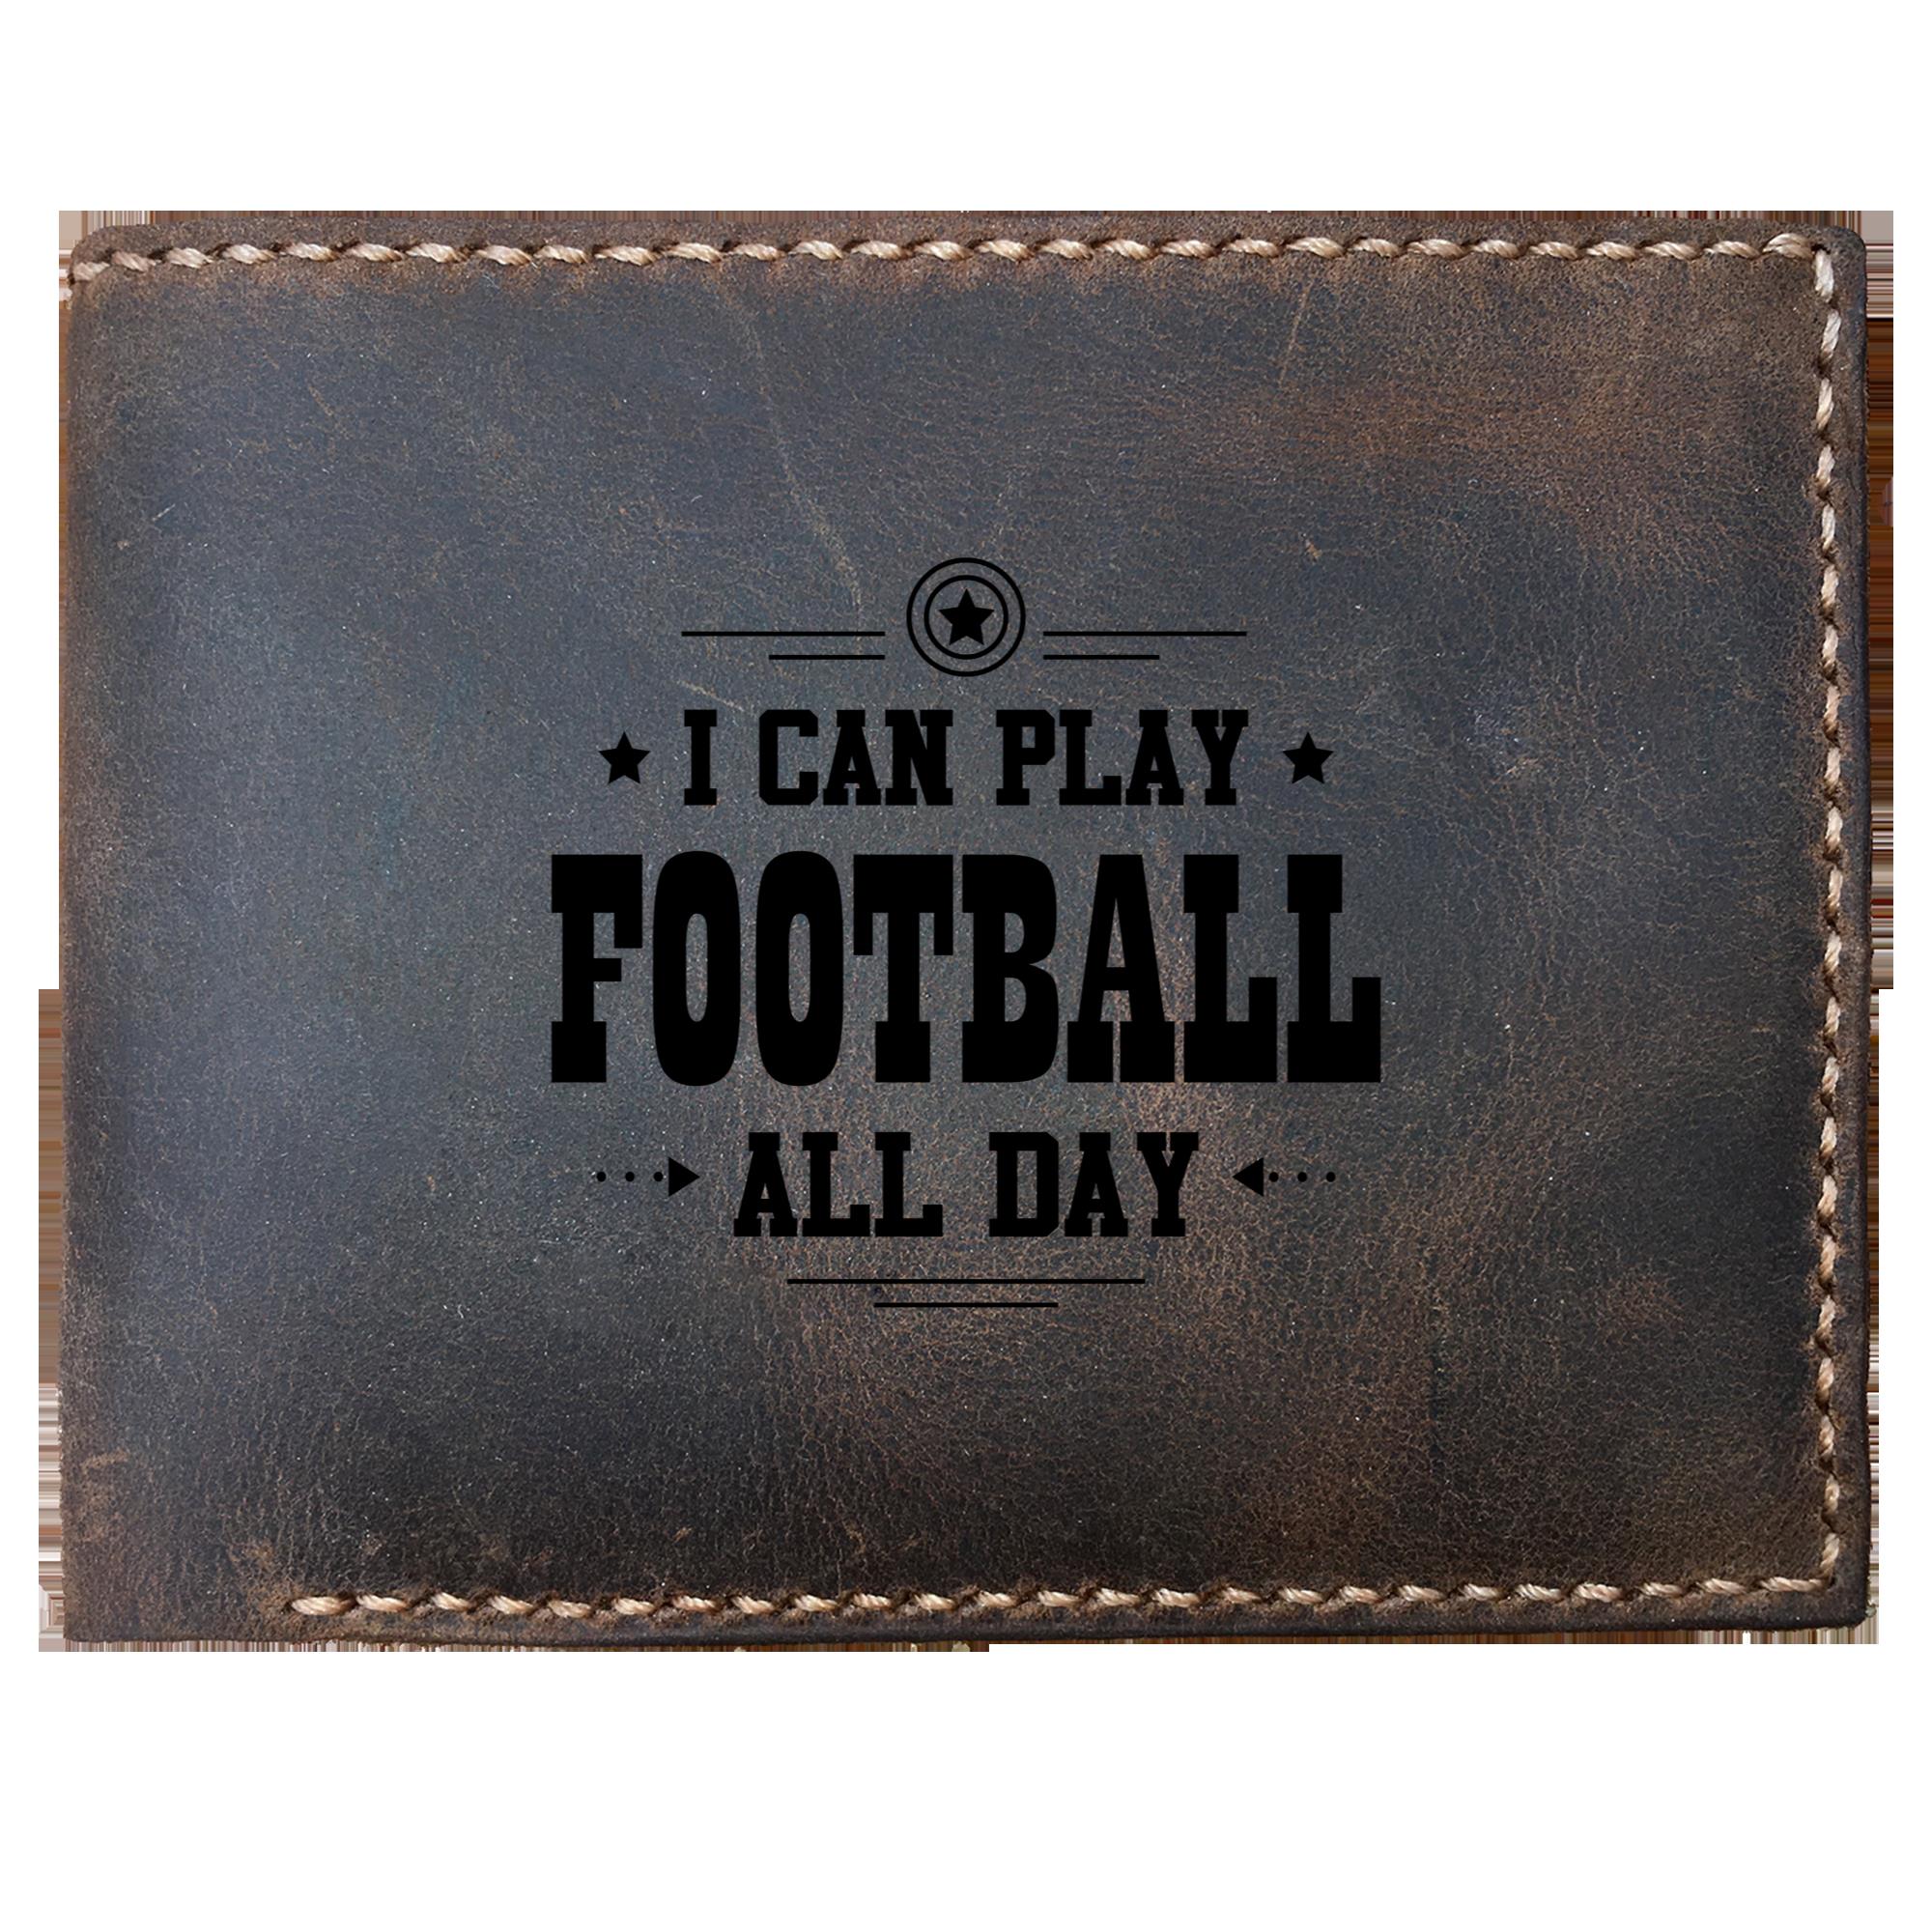 Skitongifts Funny Custom Laser Engraved Bifold Leather Wallet For Men, I Can Play Football All Day